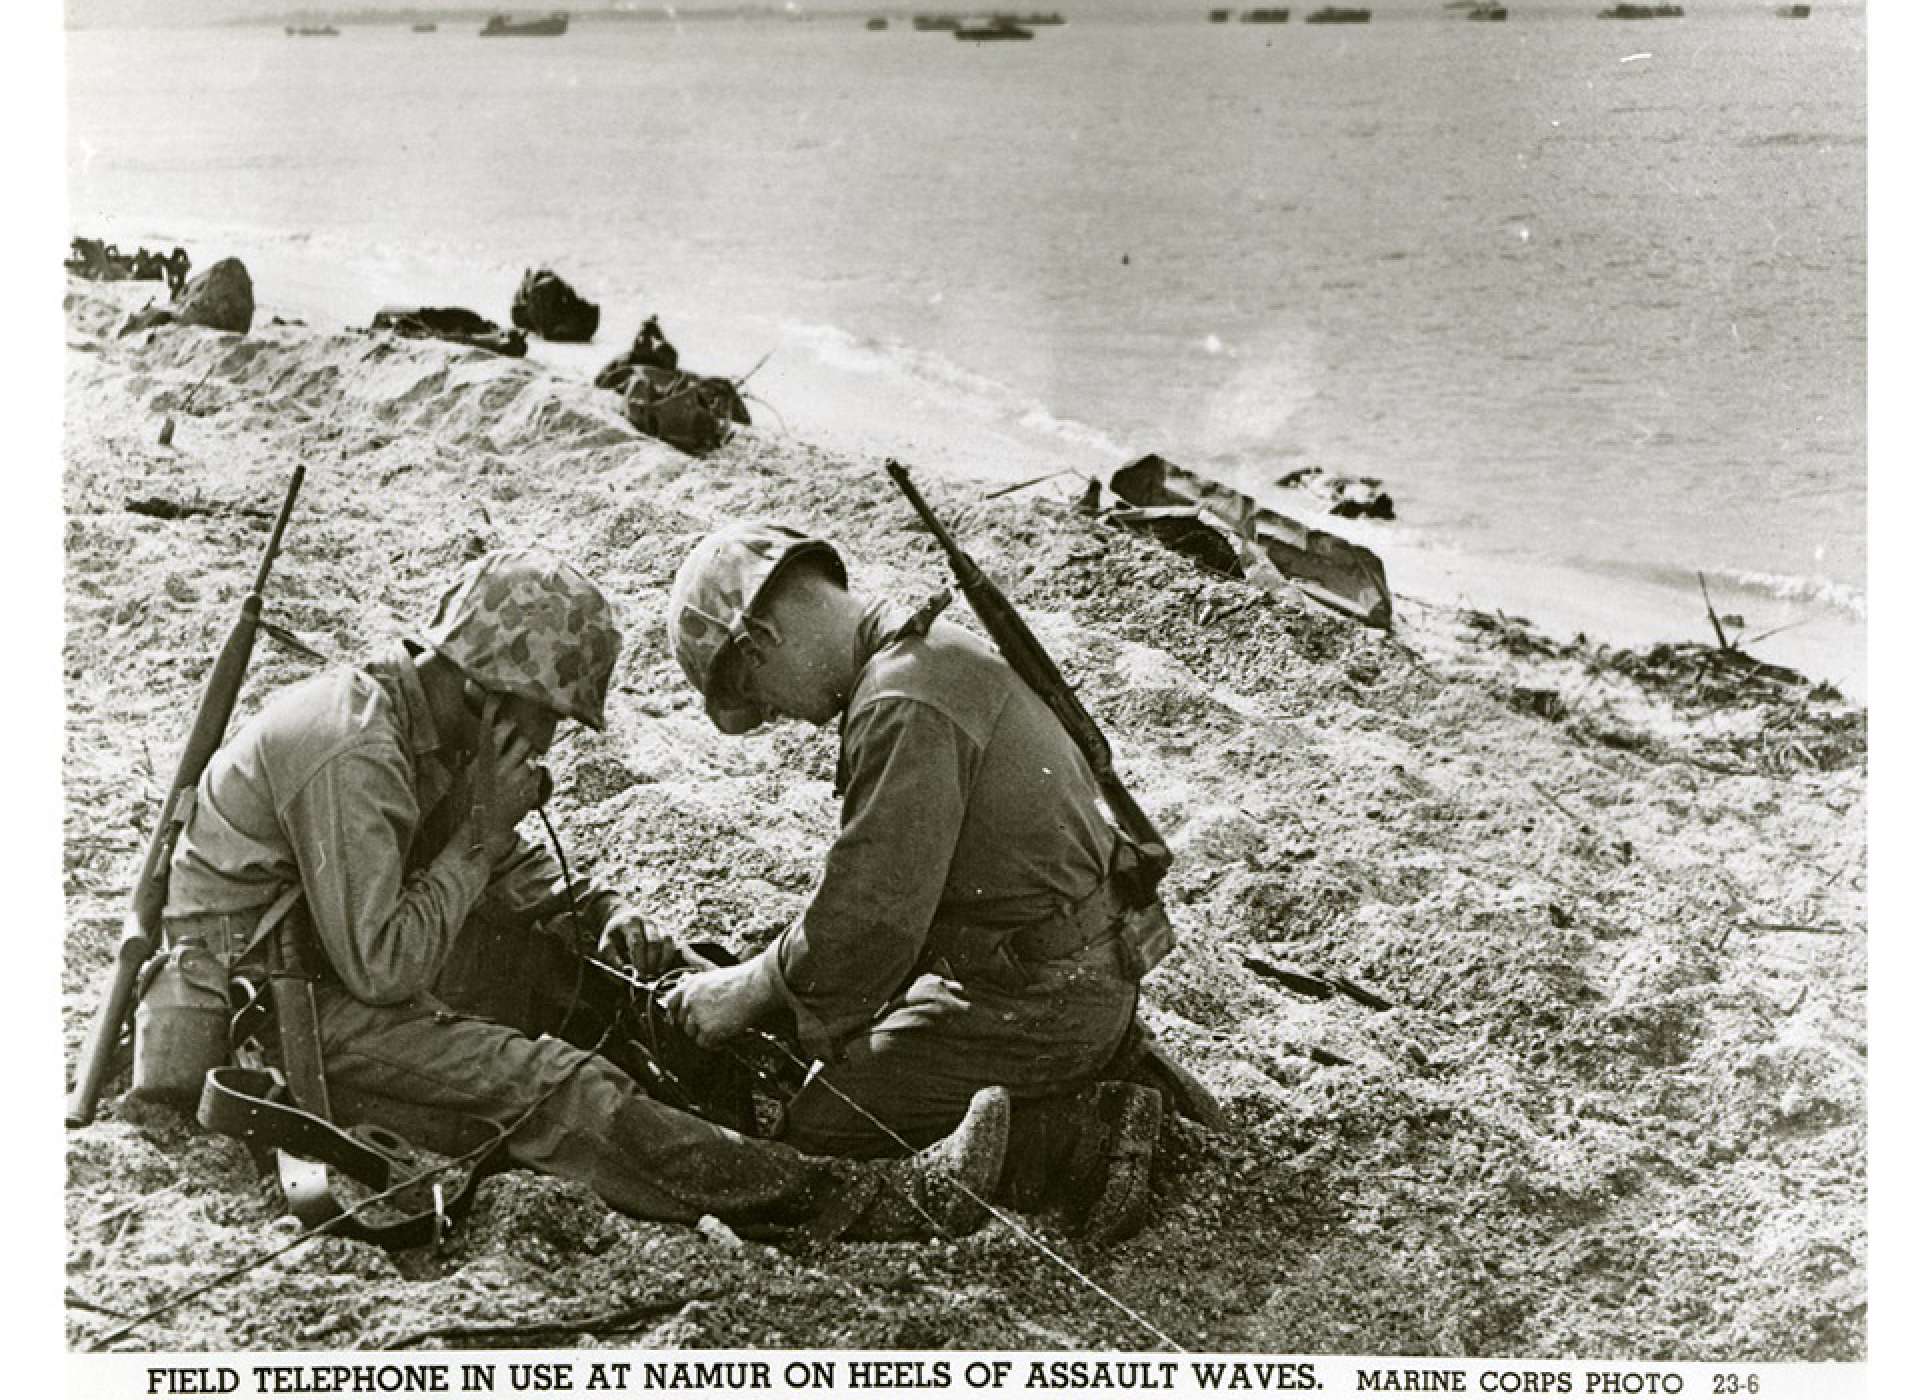 Two United States Marines using a field telephone on a beach; debris is scattered throughout; landing craft are in the ocean in the background. Official caption on front: &quot;Field telephone in use at Namur on heels of assault waves. Marine Corps Photo 23-6.&quot; Roi-Namur, Kwajalein Atoll, Marshall Islands. February 1944. Gift in memory of Sgt. Lyle E. Eberspecher, 2013.495.286